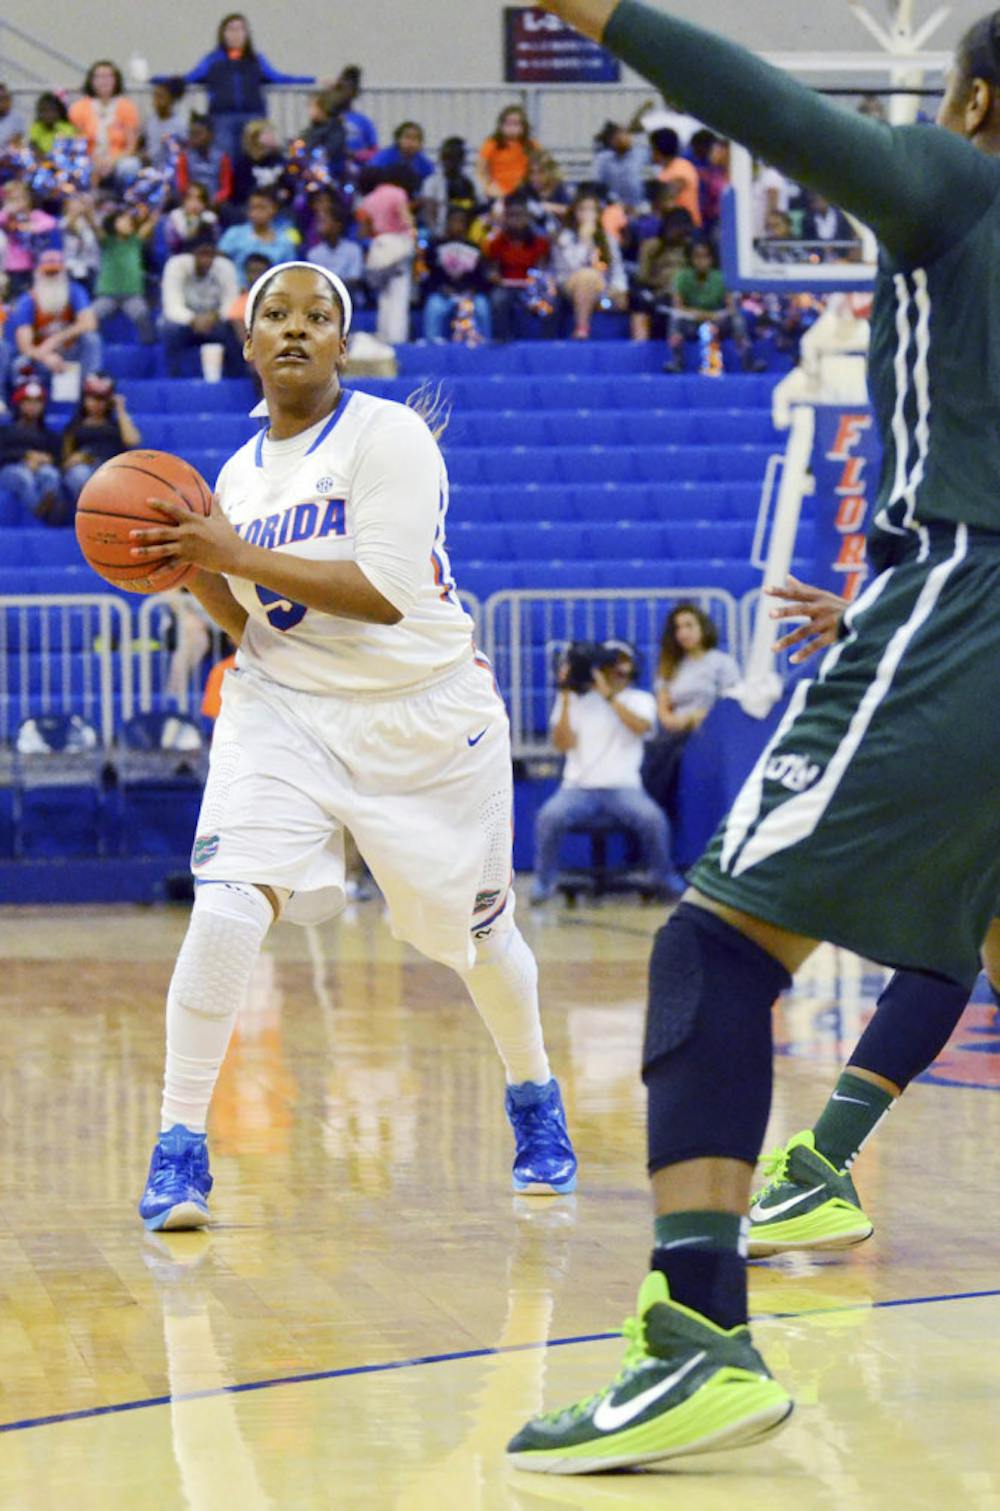 <p>Antoinette Bannister looks to pass the ball during Florida's 84-73 win against Jacksonville in the O'Connell Center.</p>